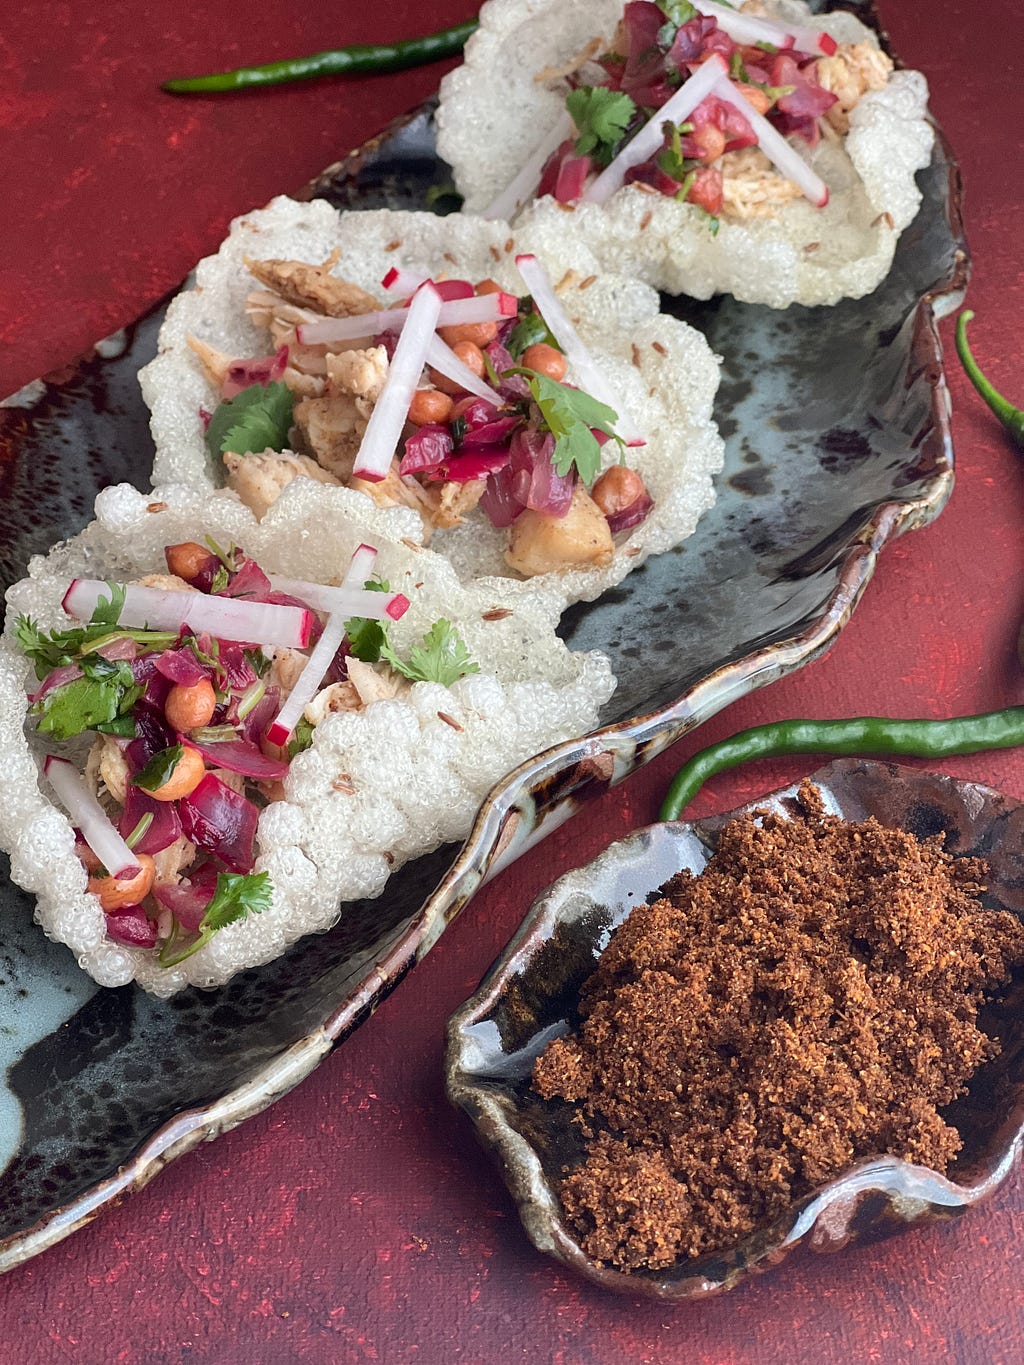 Grey ‘leaf plate’ with white cracker, loaded with colorful magenta and white fillings. Small plate on side loaded with a brown powdered masala. Green chili in background. All assembled on a maroon background.